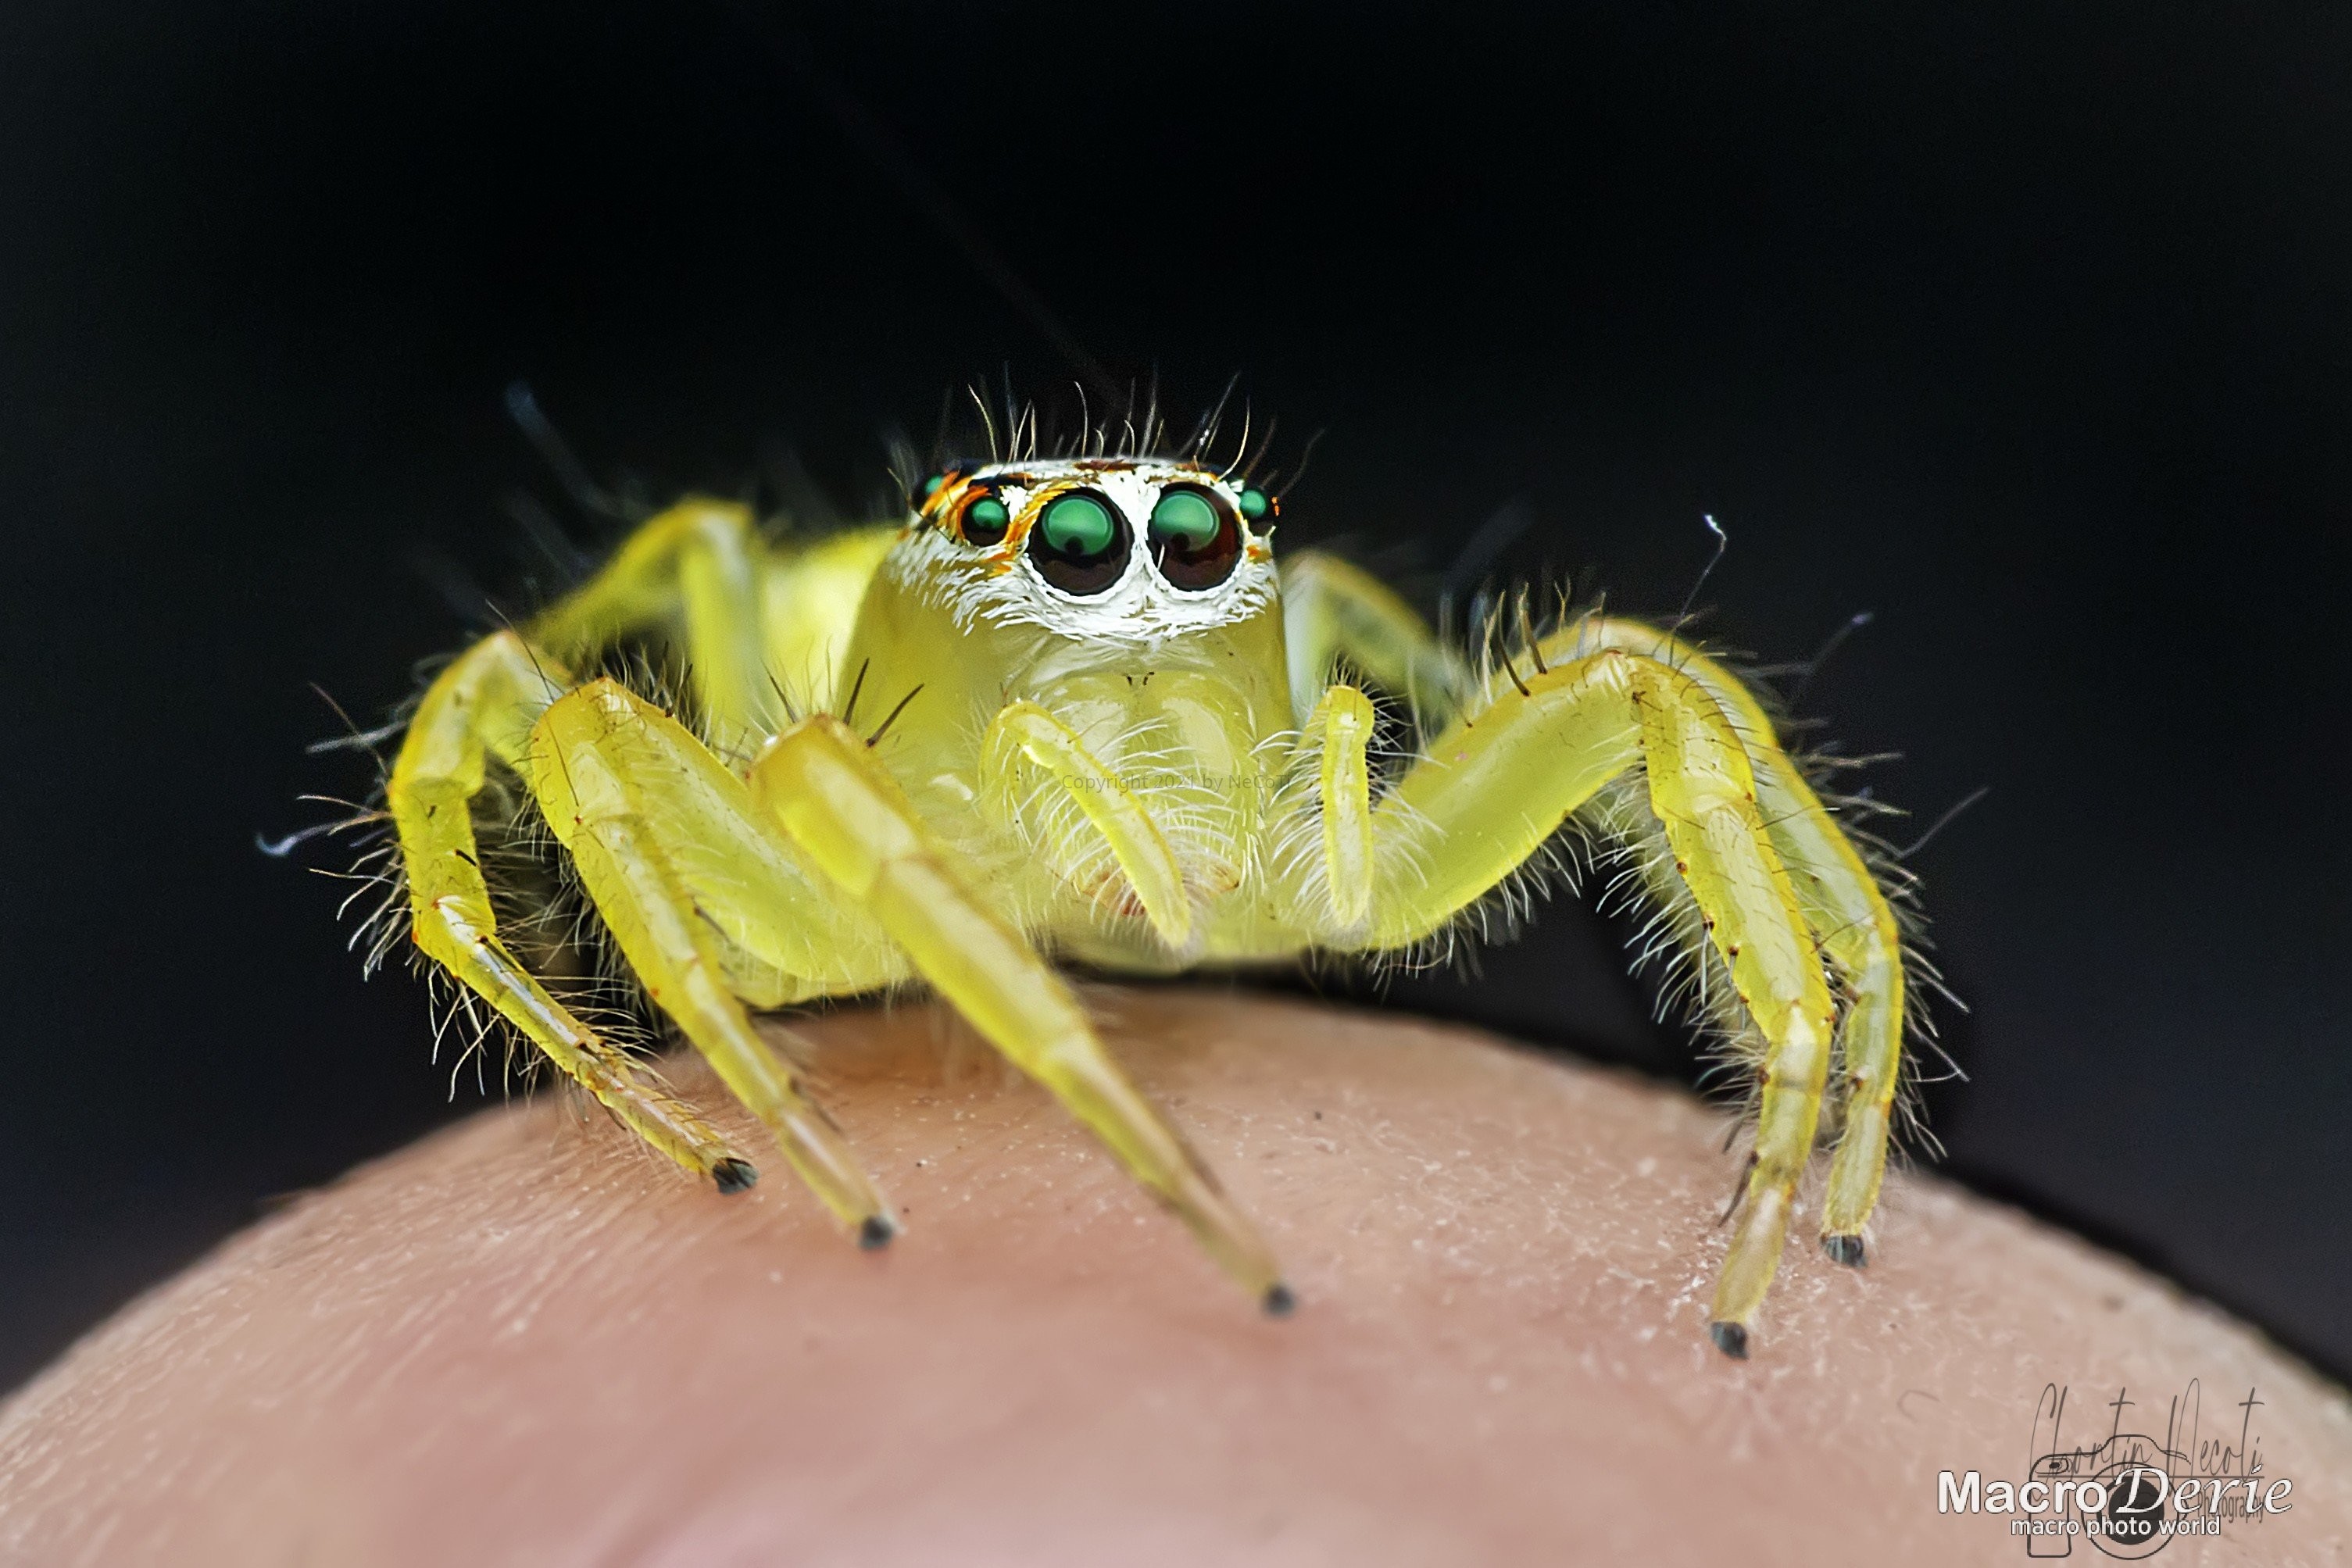 Jumping Spider on hand